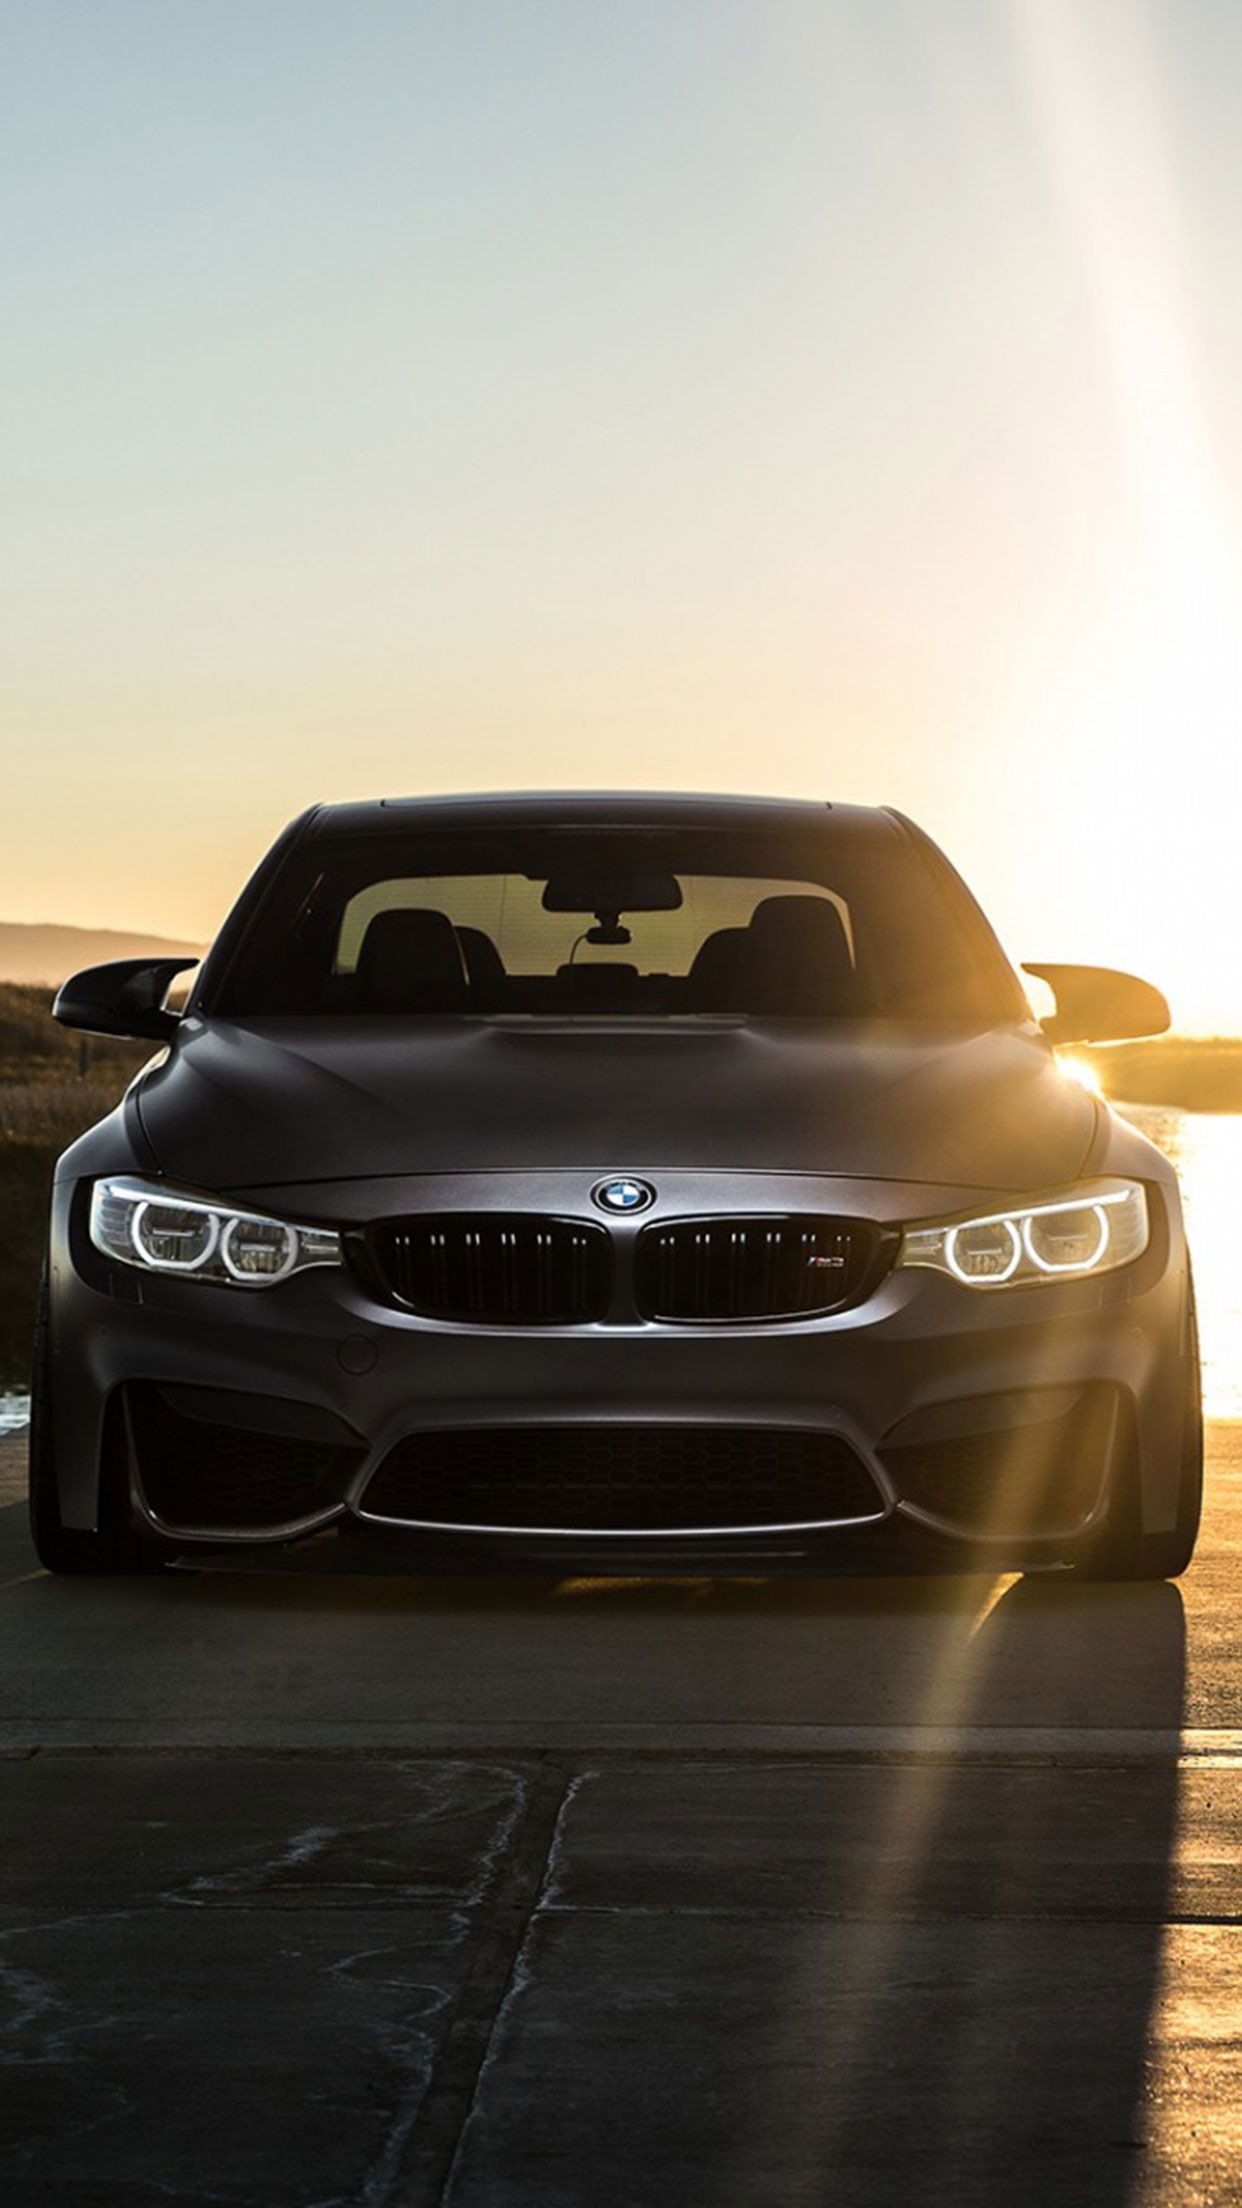 1242x2208 Grey BMW car wallpaper for #Iphone and #Android #BMW #Car at wallzapp.com